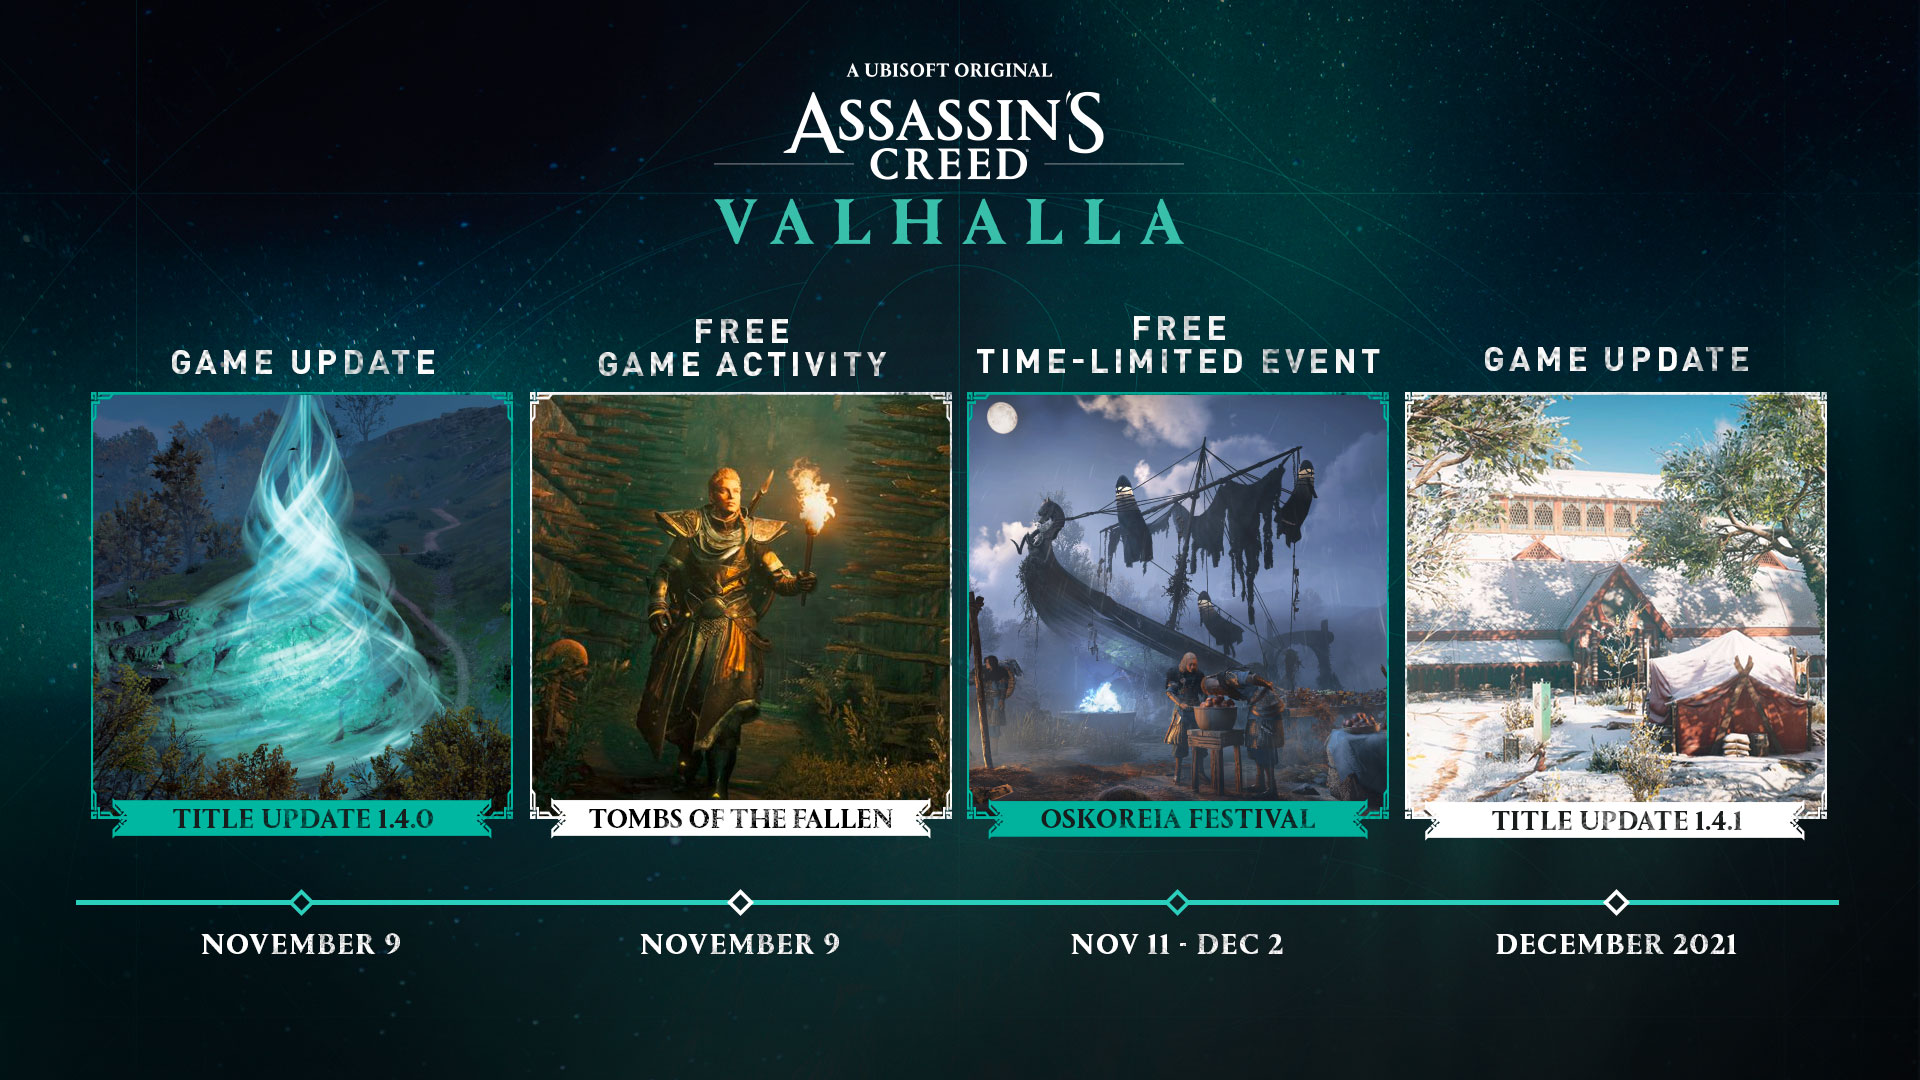 Assassin's Creed Valhalla update adds new themed content